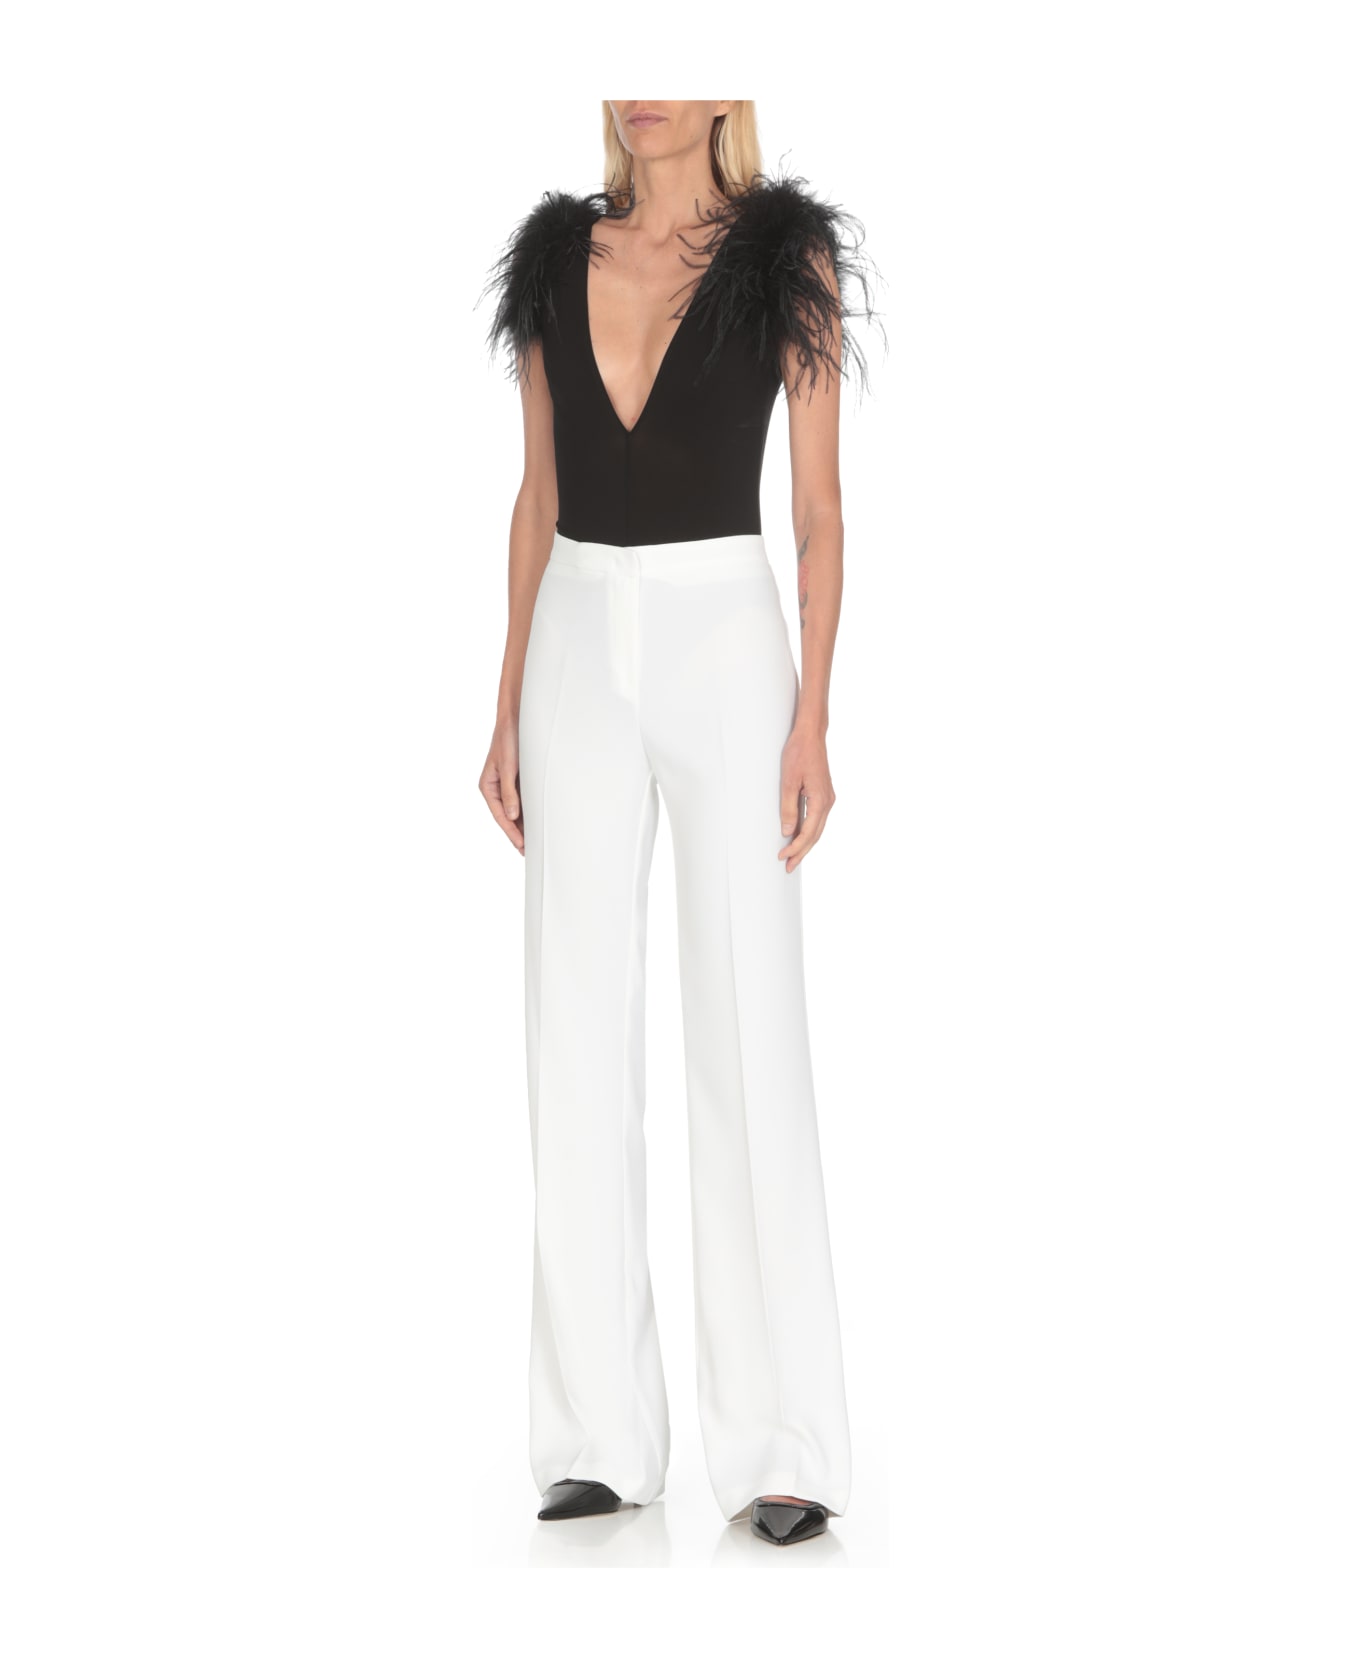 Pinko Body With Feathers - Black